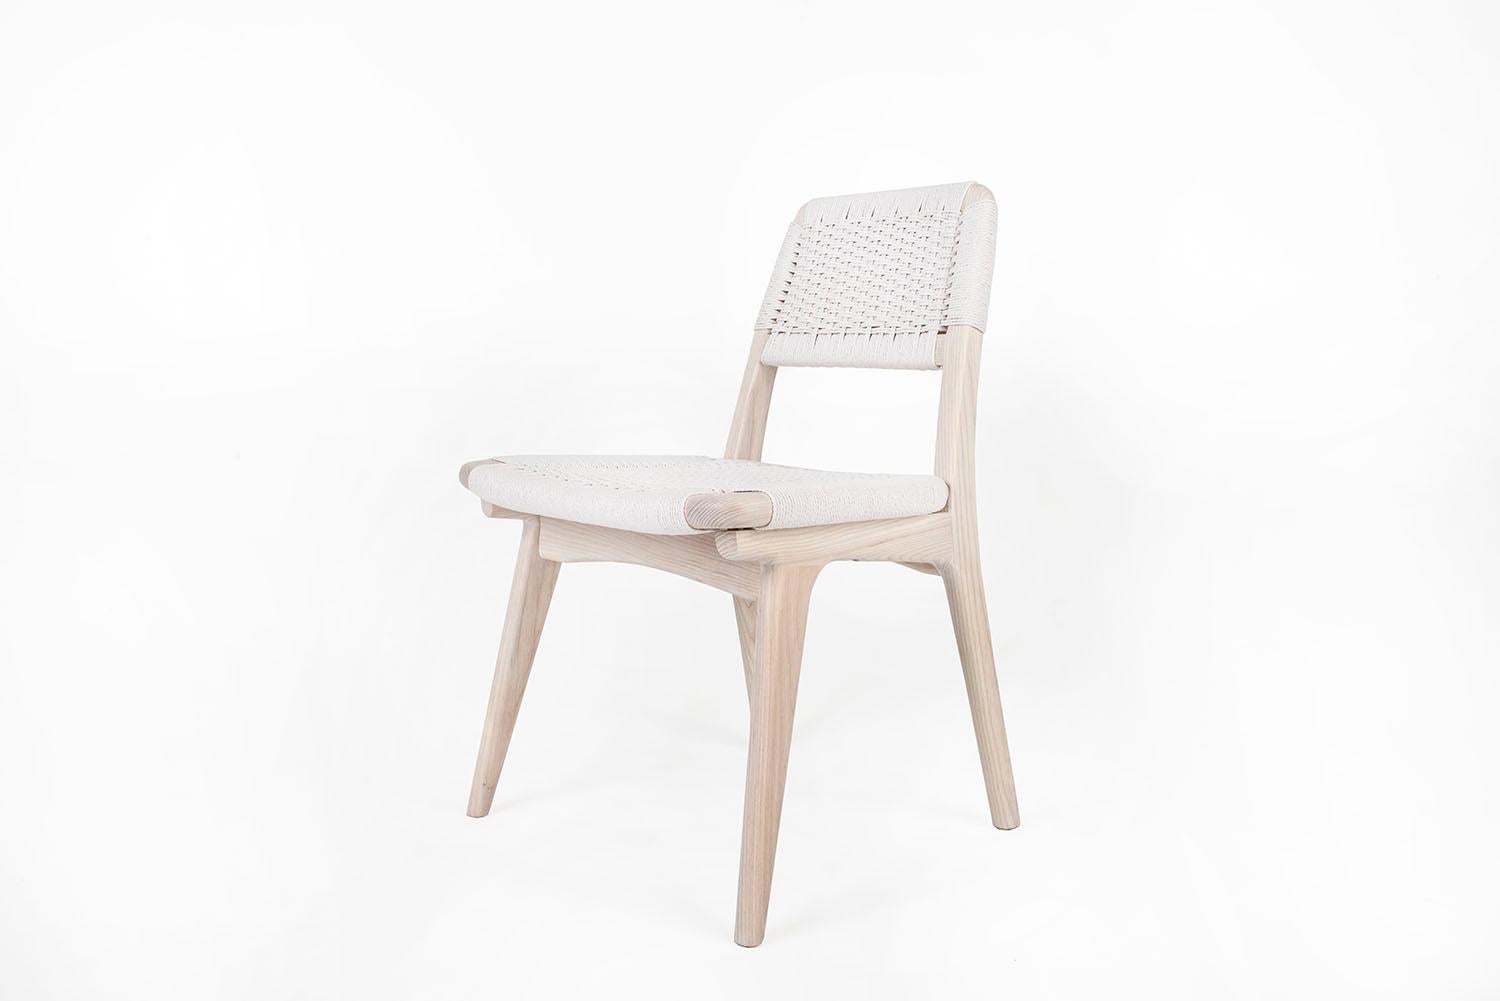 Midcentury inspired Rian low back dining or office chair made with hardwood and woven Danish cord. Can be made with any domestic or exotic hardwood of your choosing. All the beauty and sophistication of our Rian collection realized in a new low back